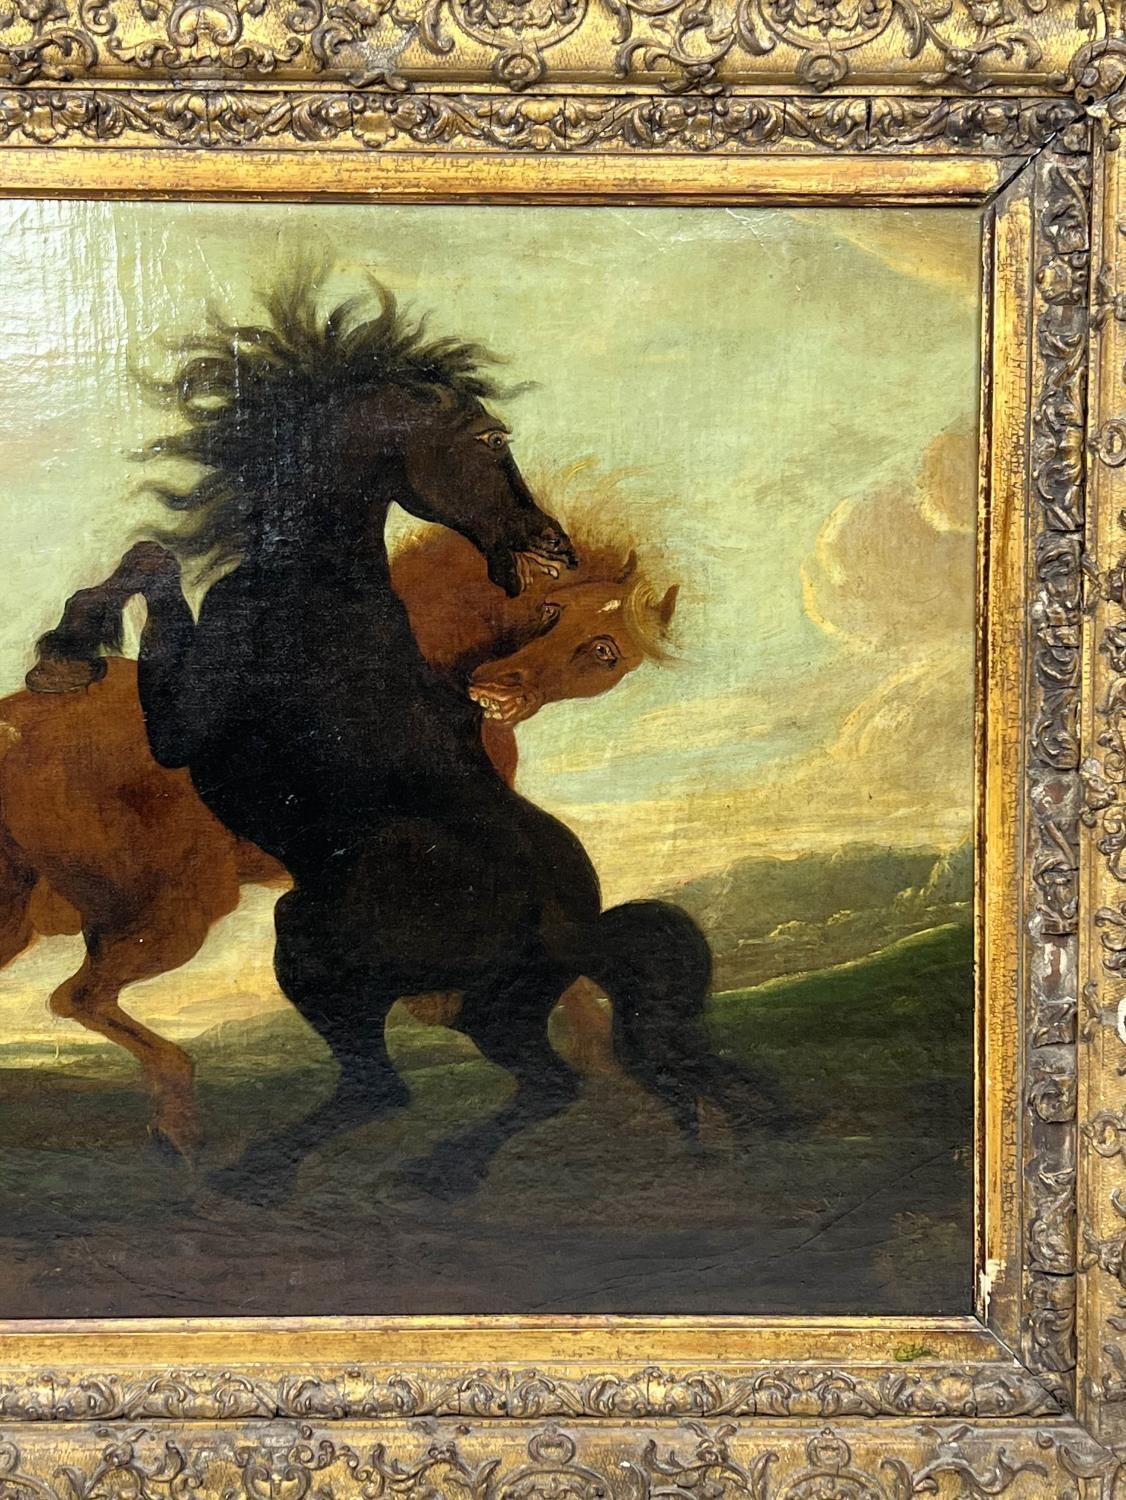 MANNER OF EUGENE DELACROIX (French 1798-1863) 'Fighting Stallions', 19th century, oil on canvas, - Image 3 of 6